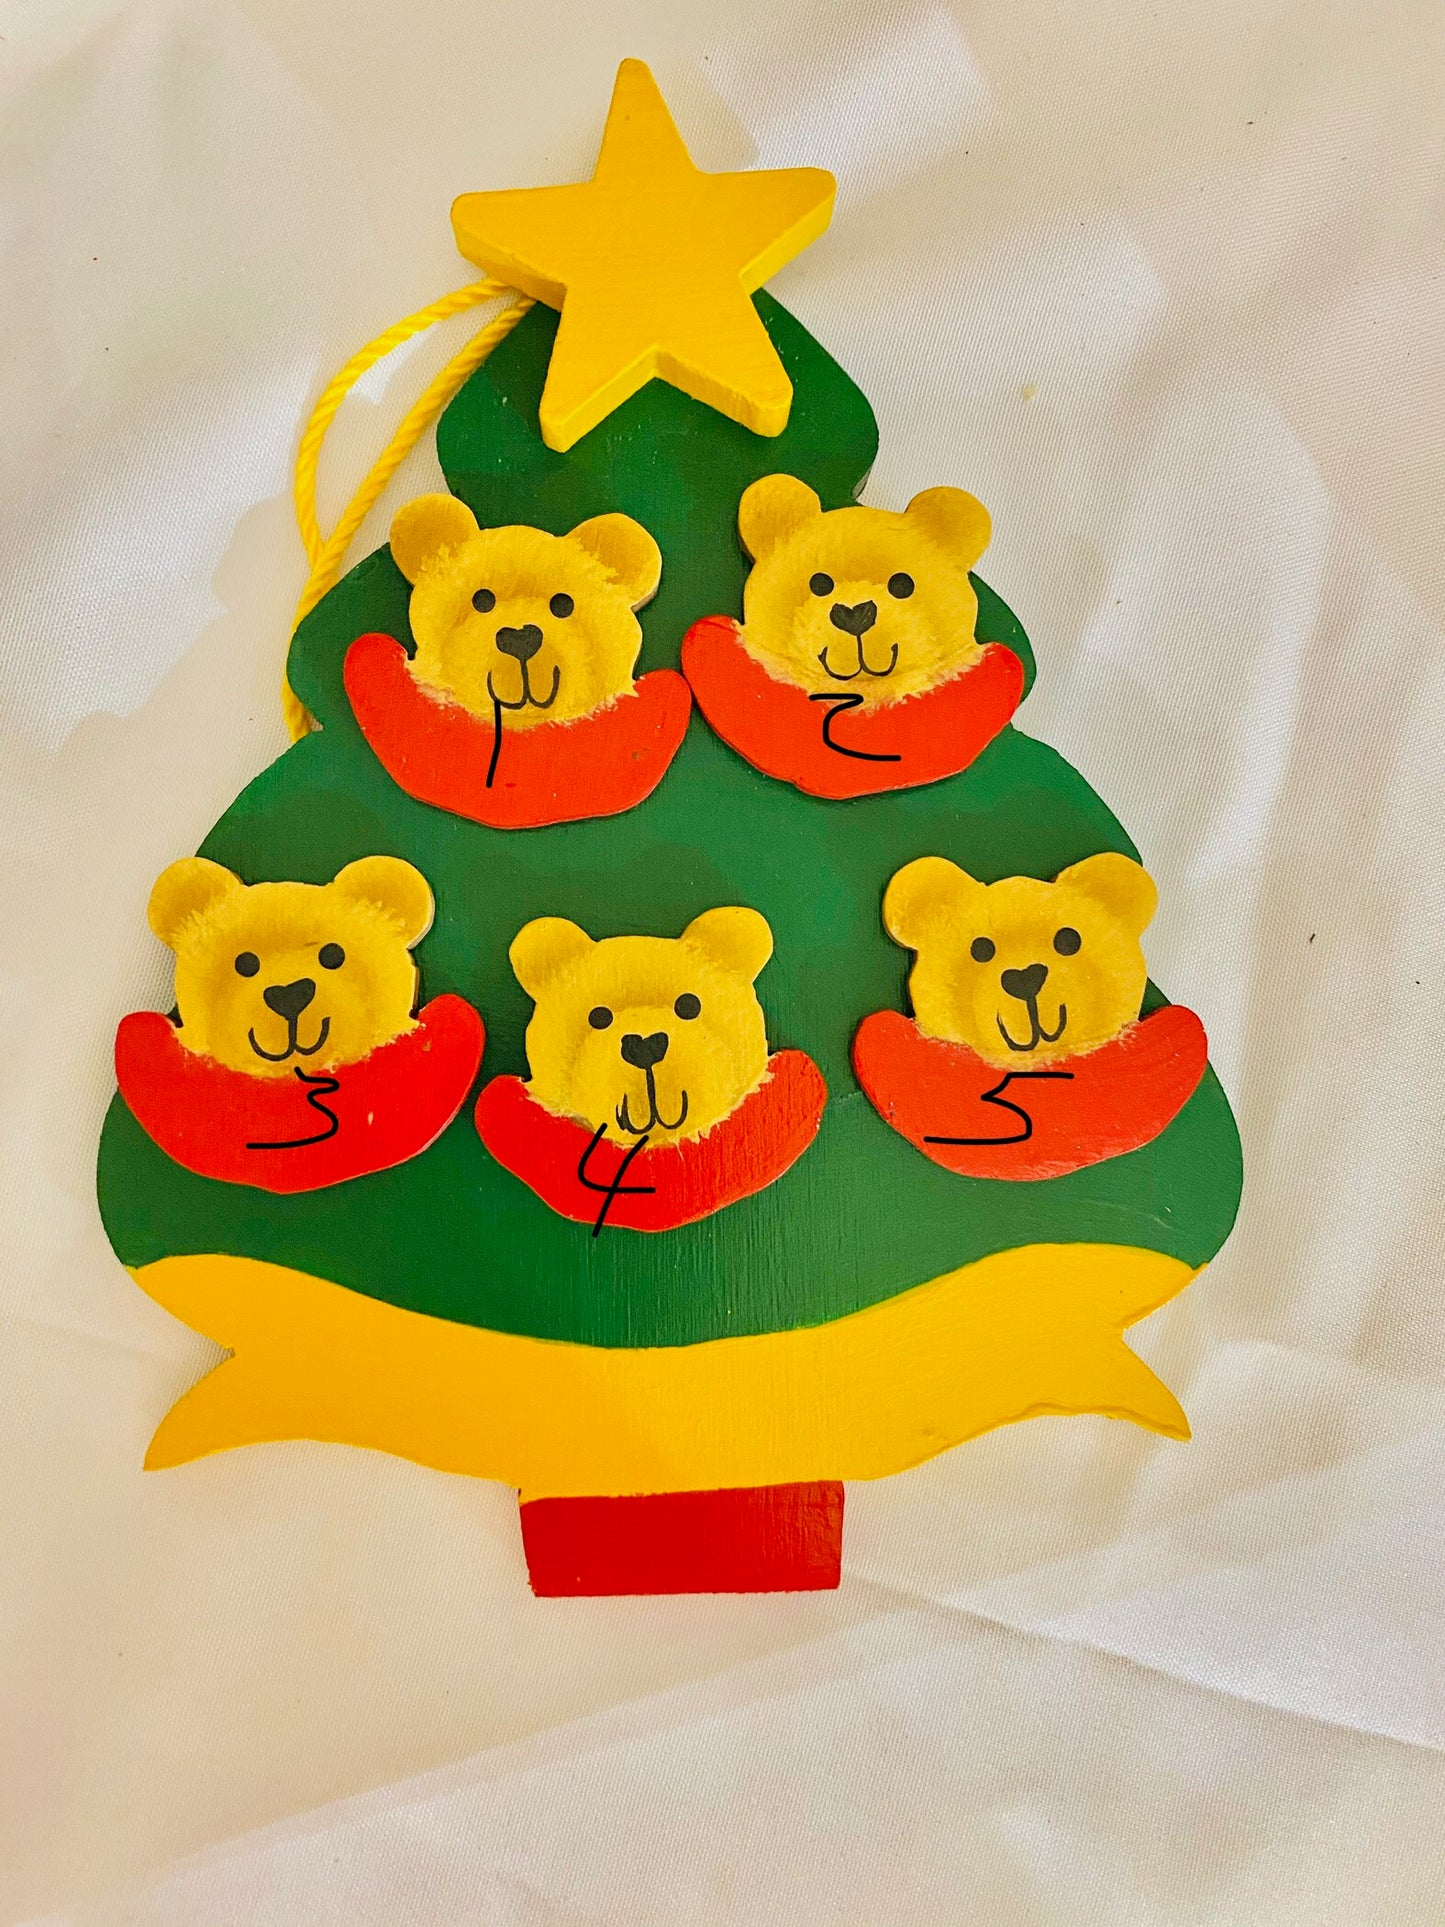 Personalized Ornament  5 Bear Faces on a Christmas Tree  6" x 4.5"